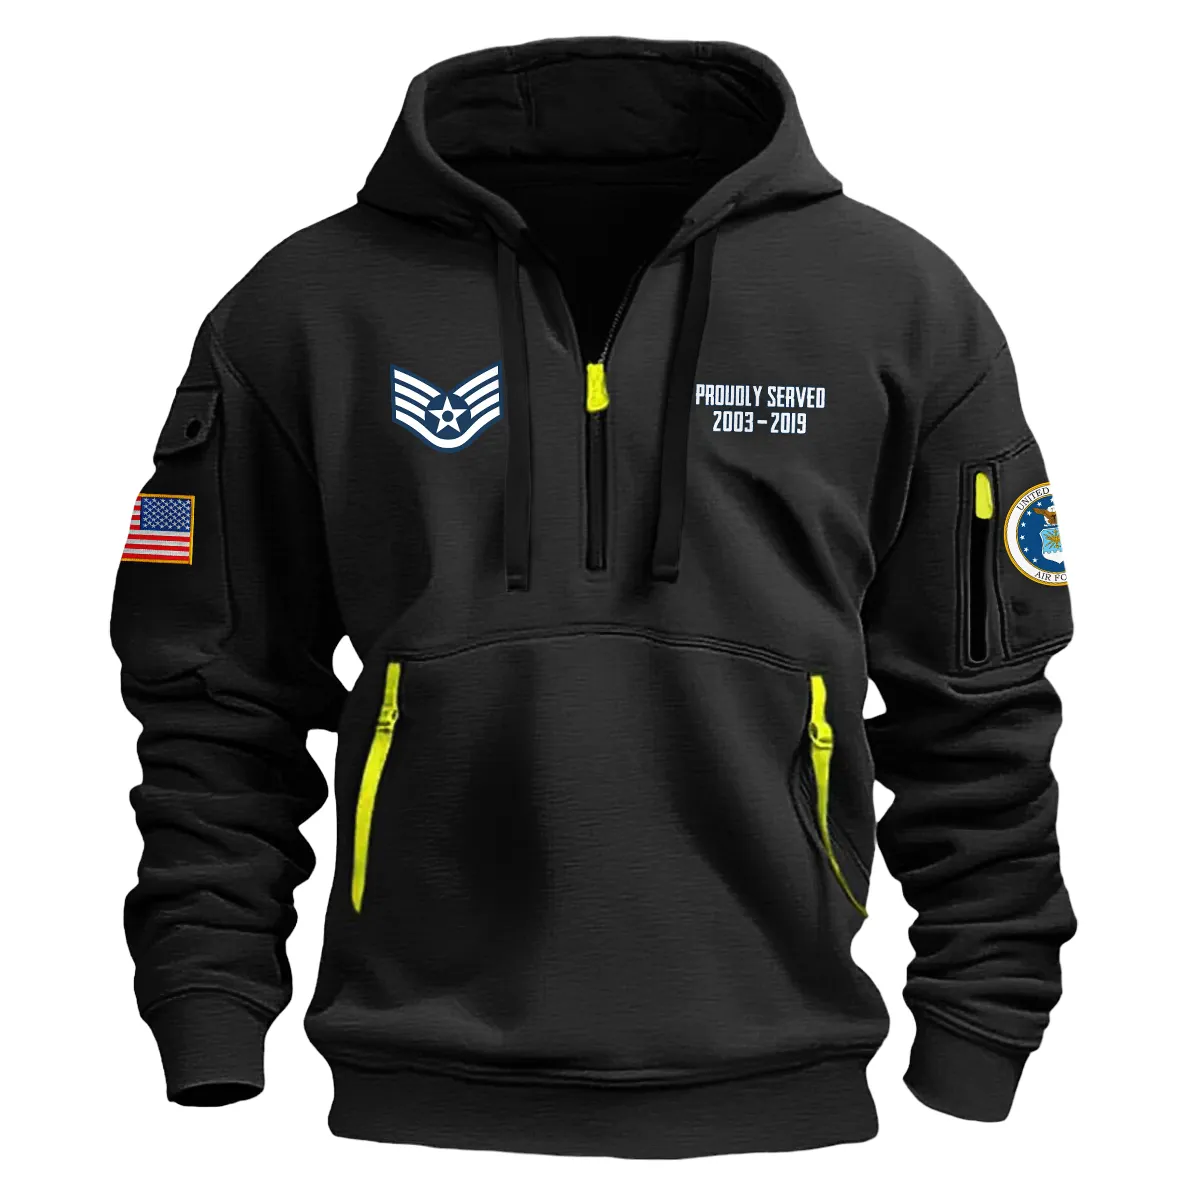 US Military All Branches! Personalized Gift E6-TSGT U.S. Air Force Fashion Hoodie Half Zipper